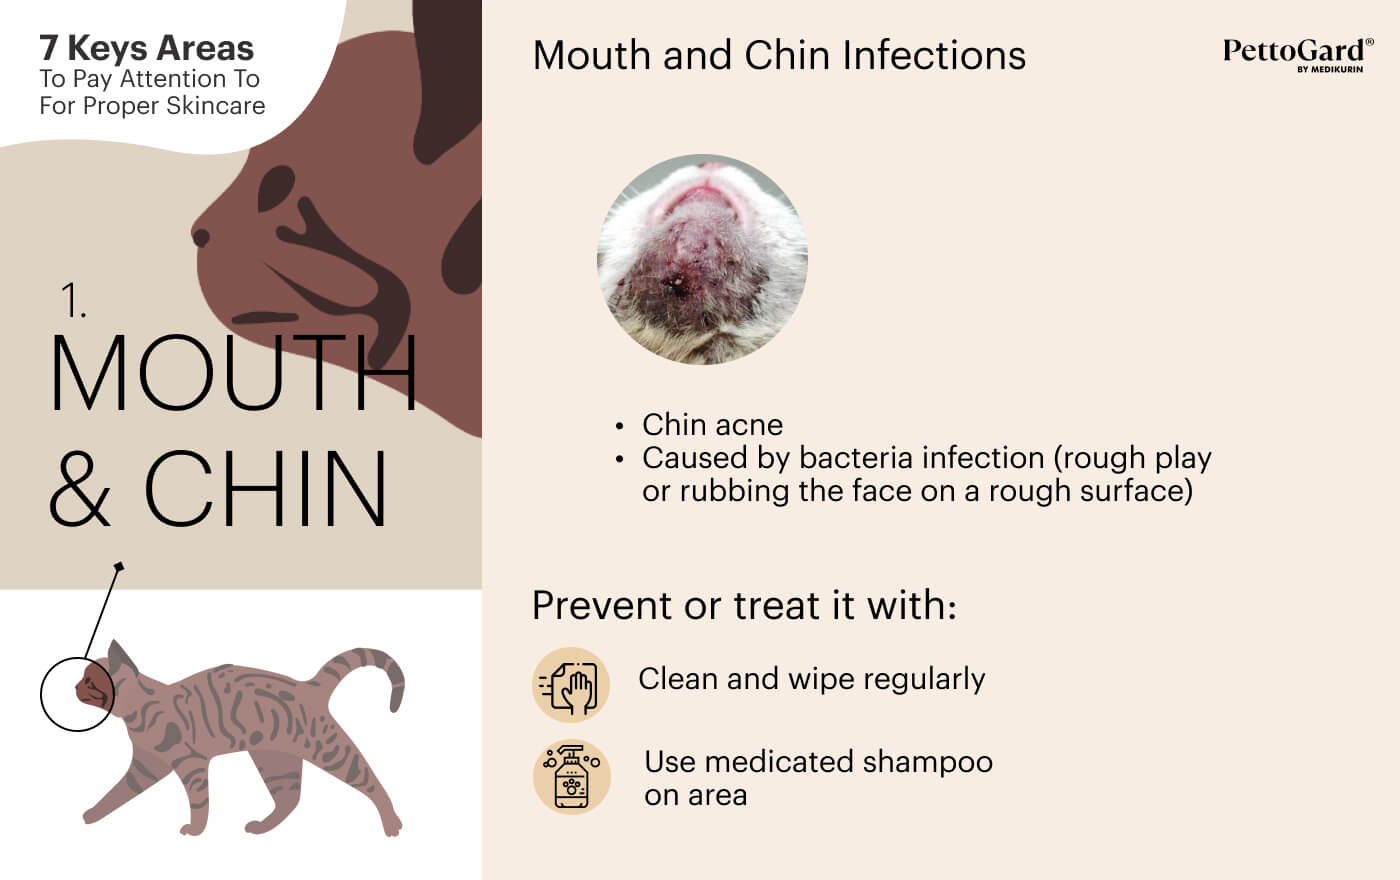 MEDIKURIN Pettogard Pet Mouth and Chin Area Skincare Tips